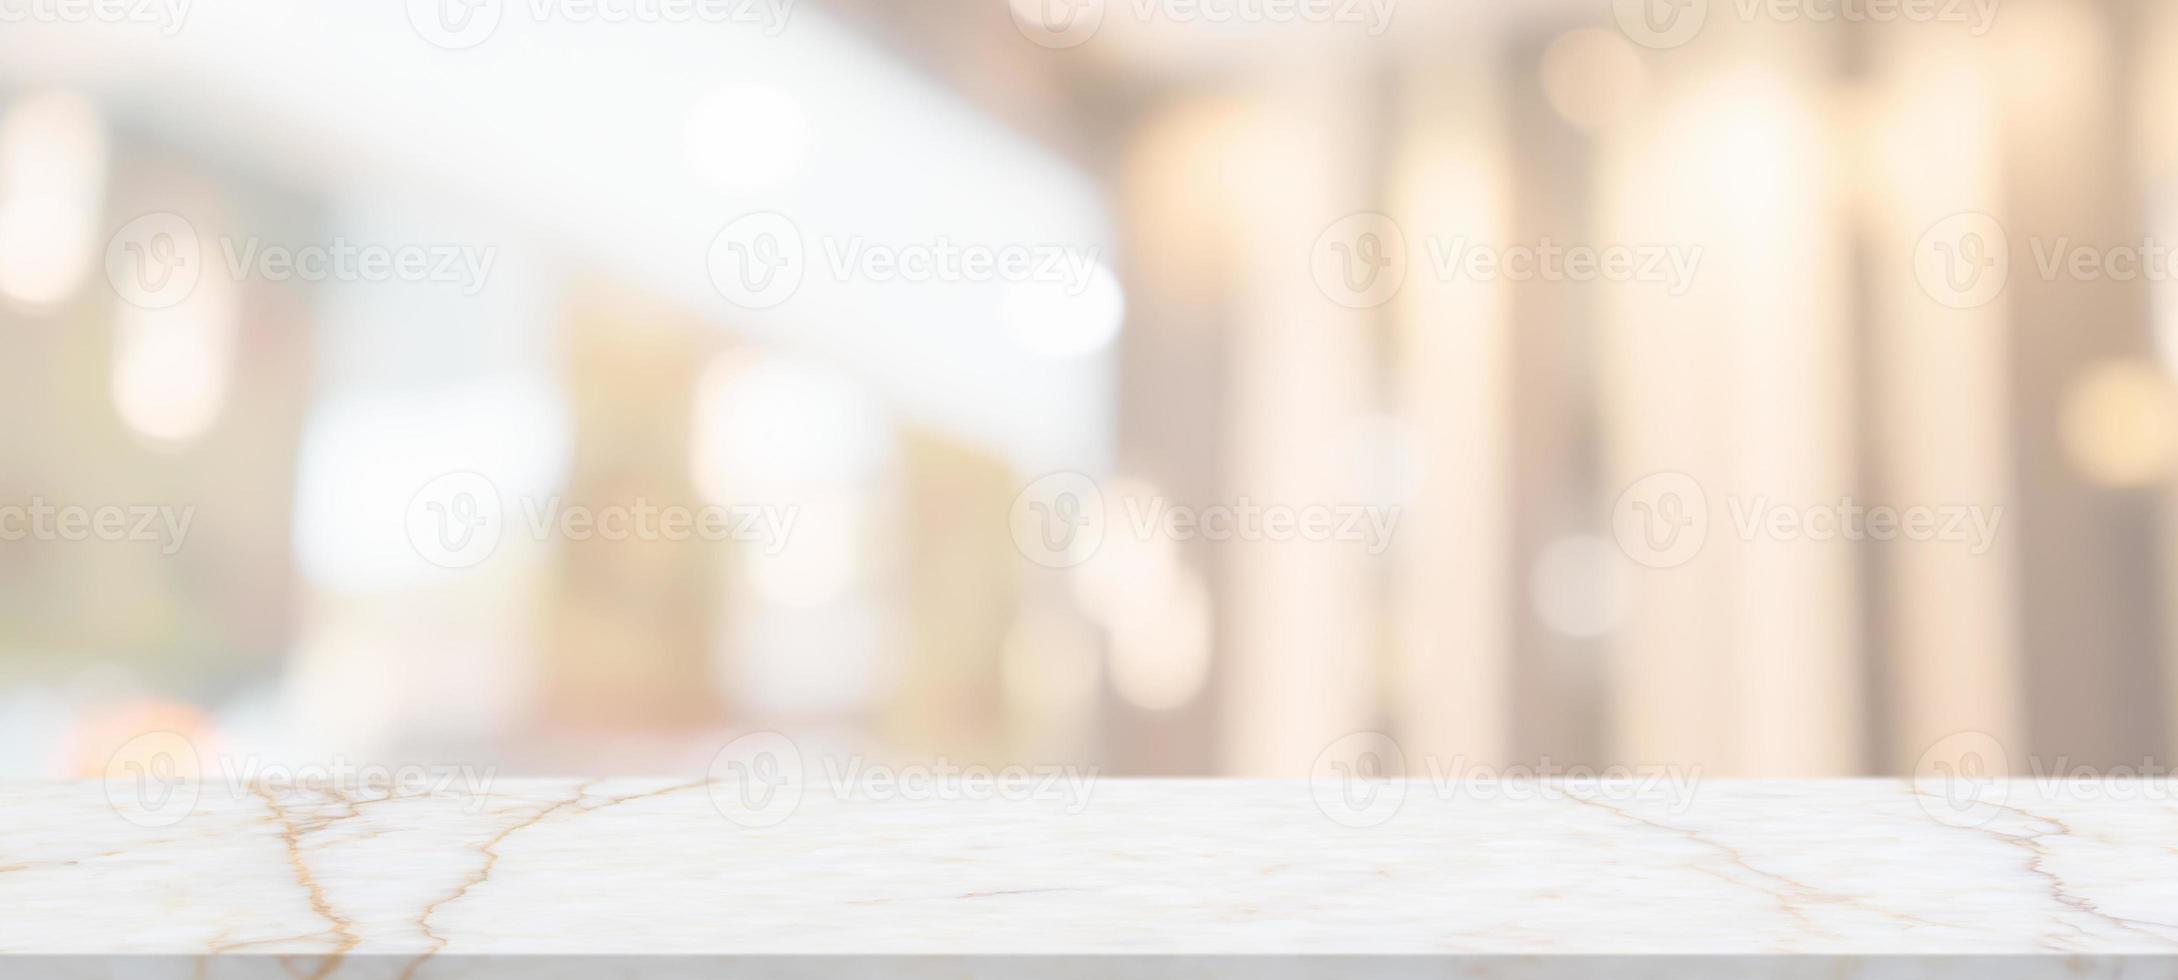 marble table top with blurred abstract cafe restaurant interior background photo